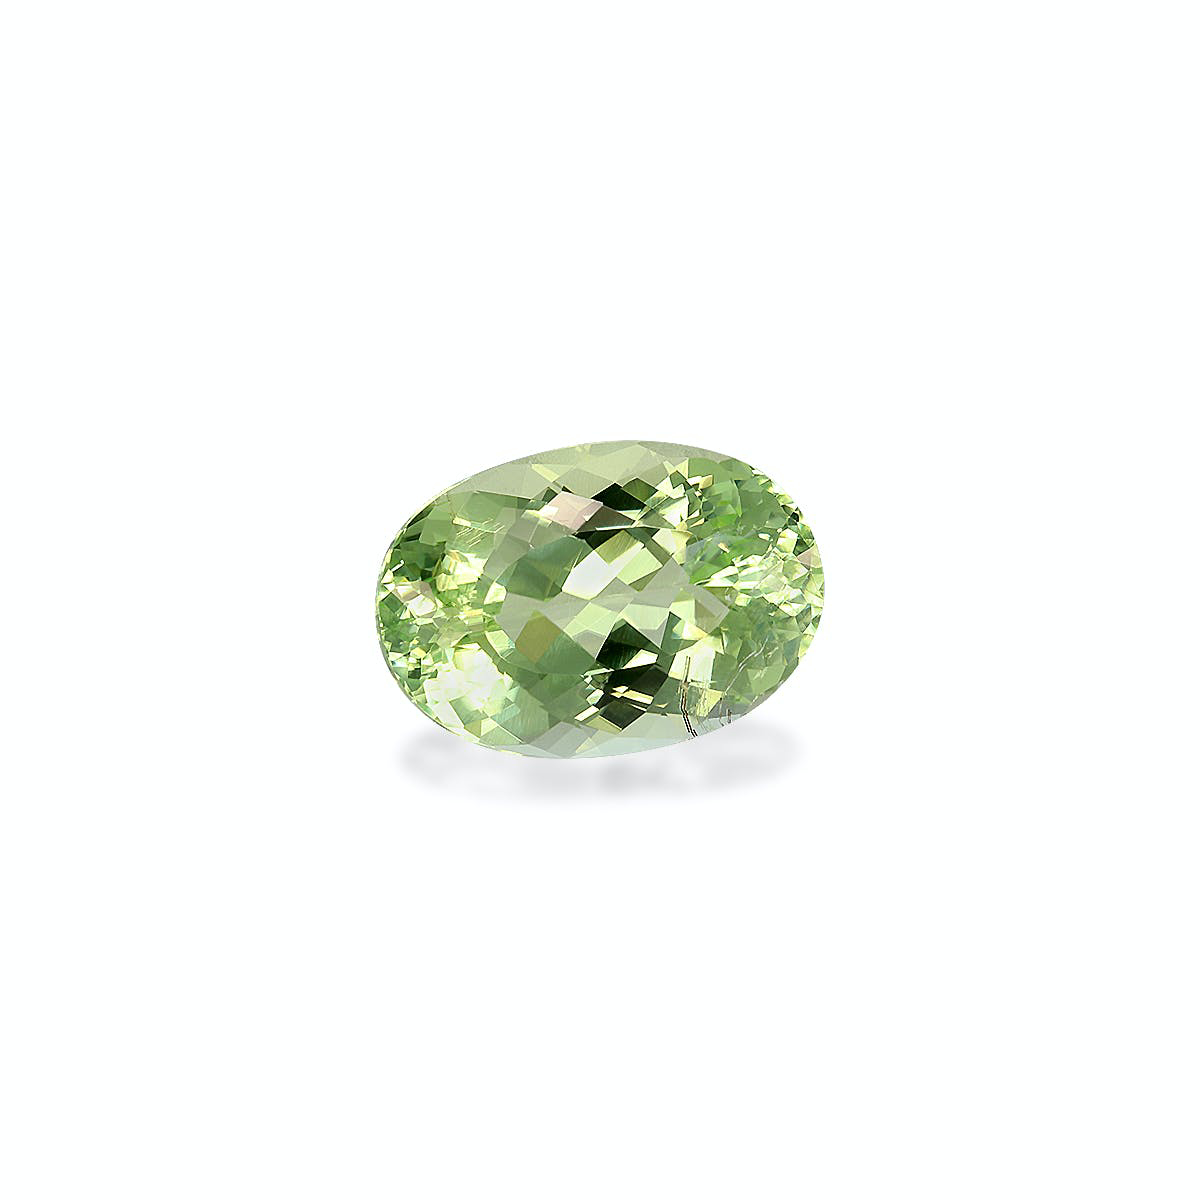 Picture of Lime Green Paraiba Tourmaline 3.92ct (MZ0303)